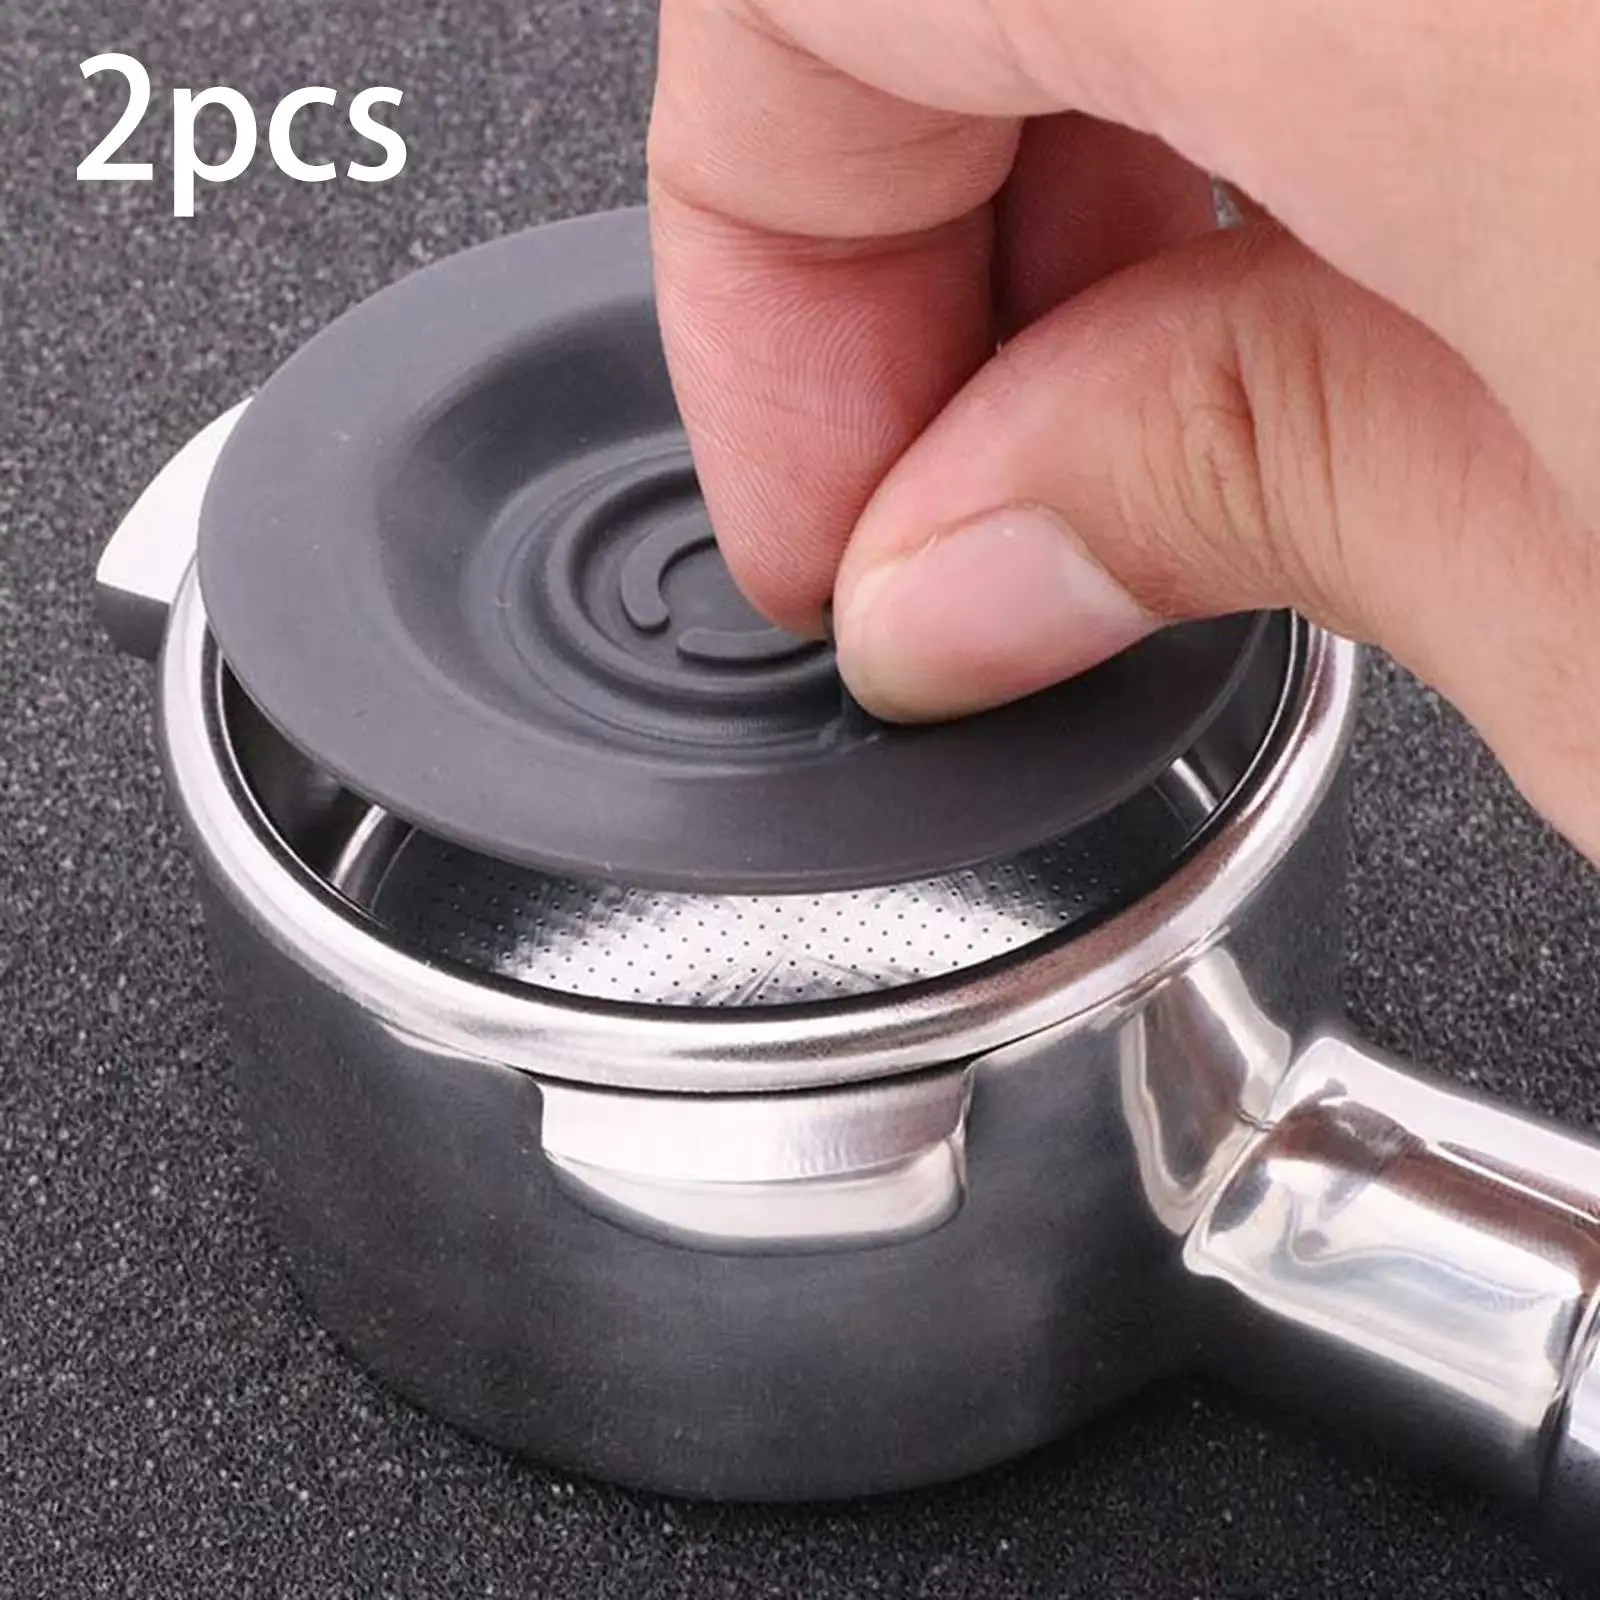 2Pcs 54mm Espresso Cleaning Disc Coffee Machine Accessory Portable Backflush Disc for Bes870XL Bes878bss Bes880 Espresso Machine